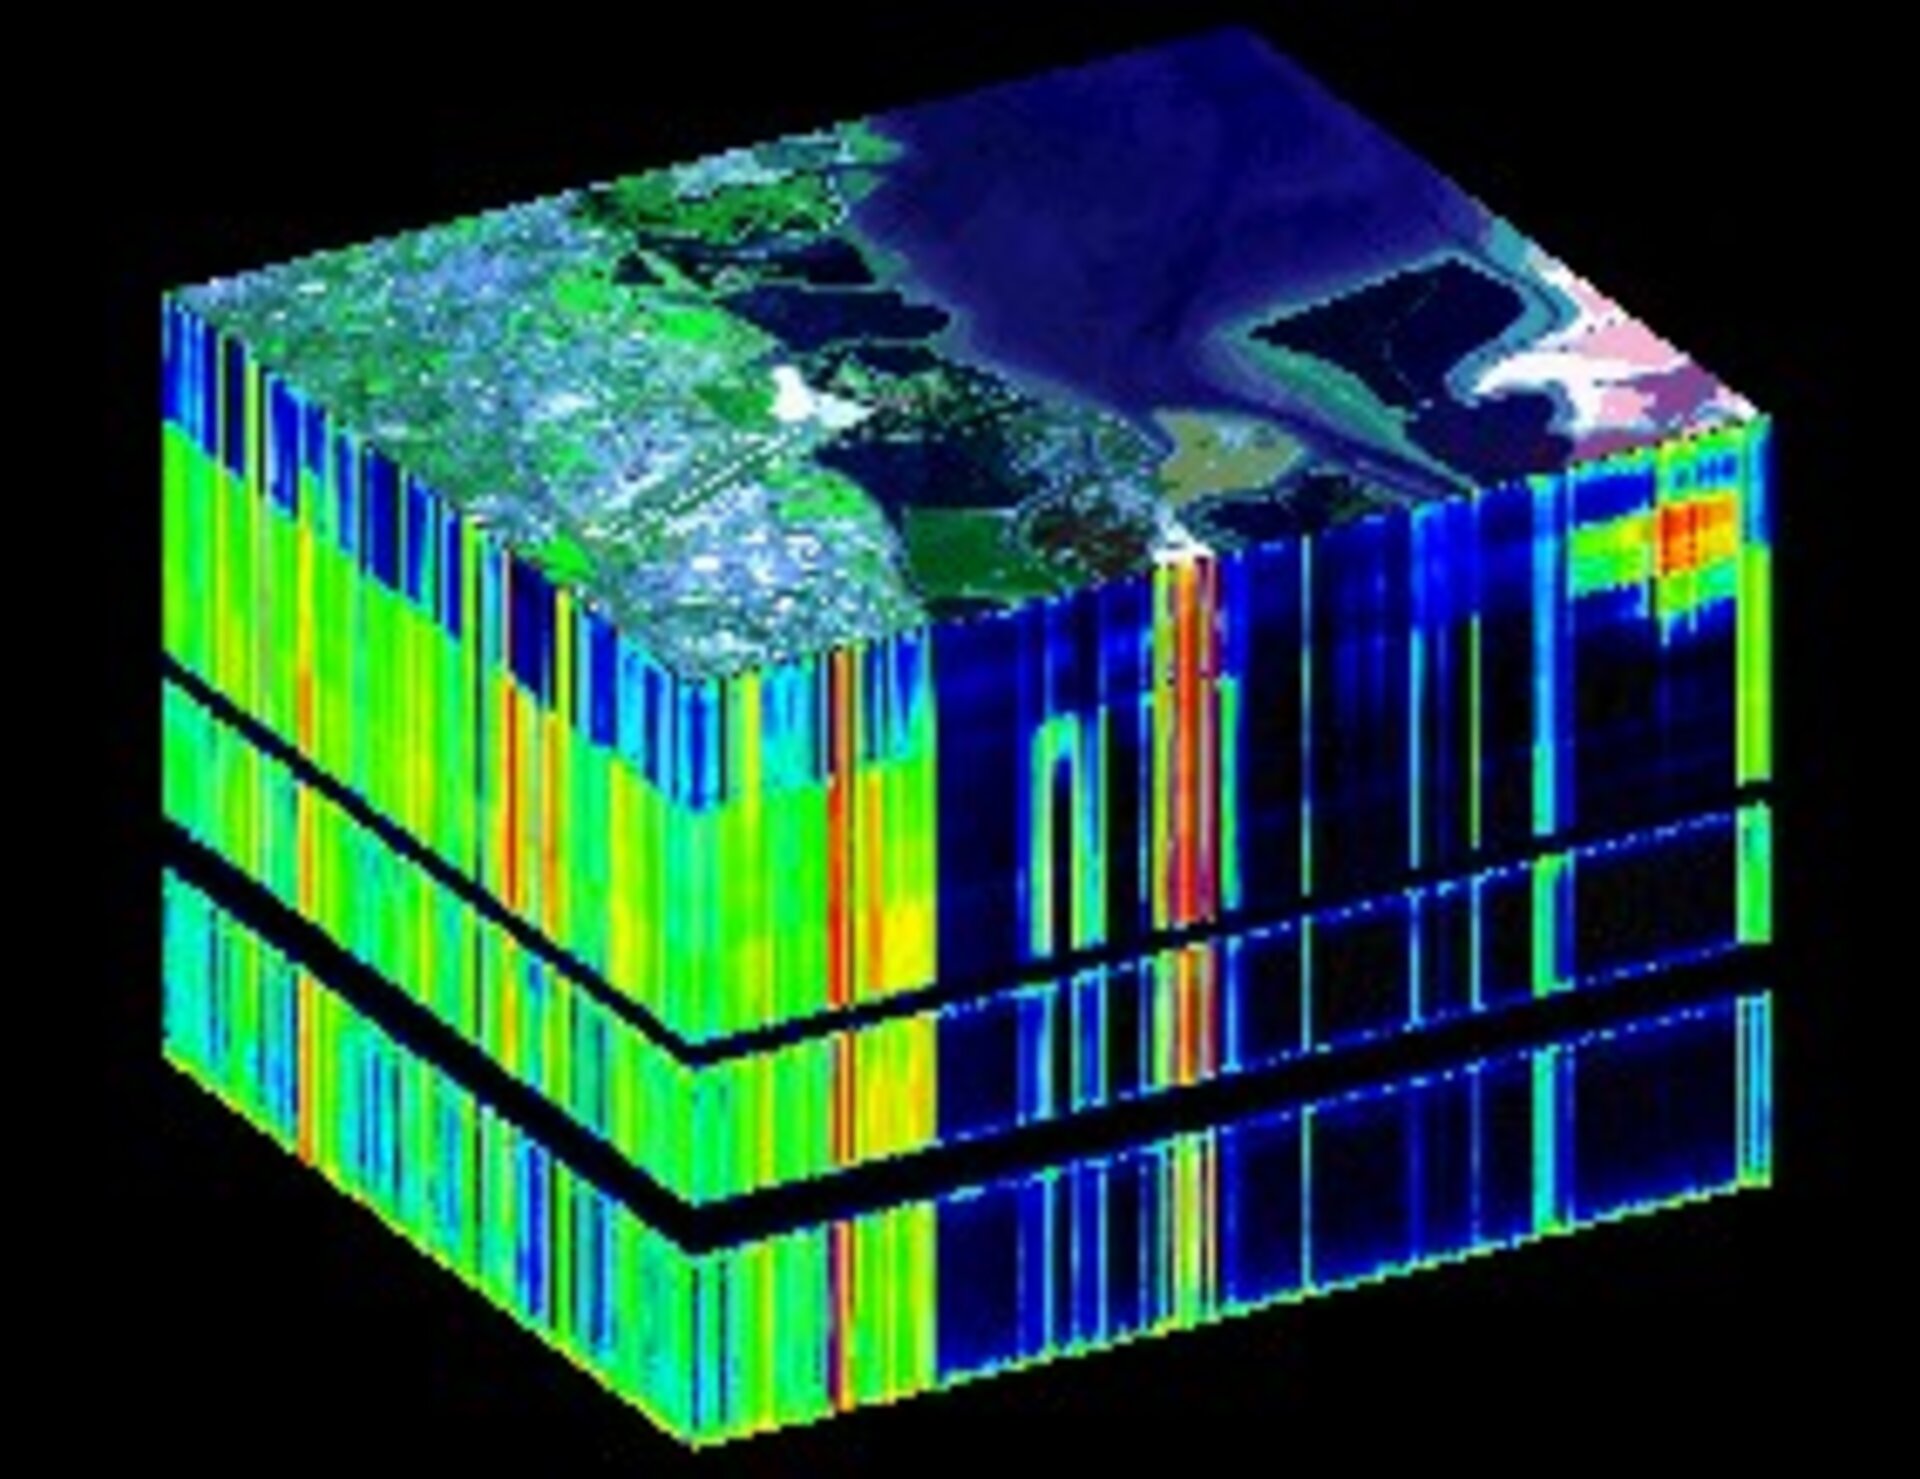 Hyperspectral image 'data cube'